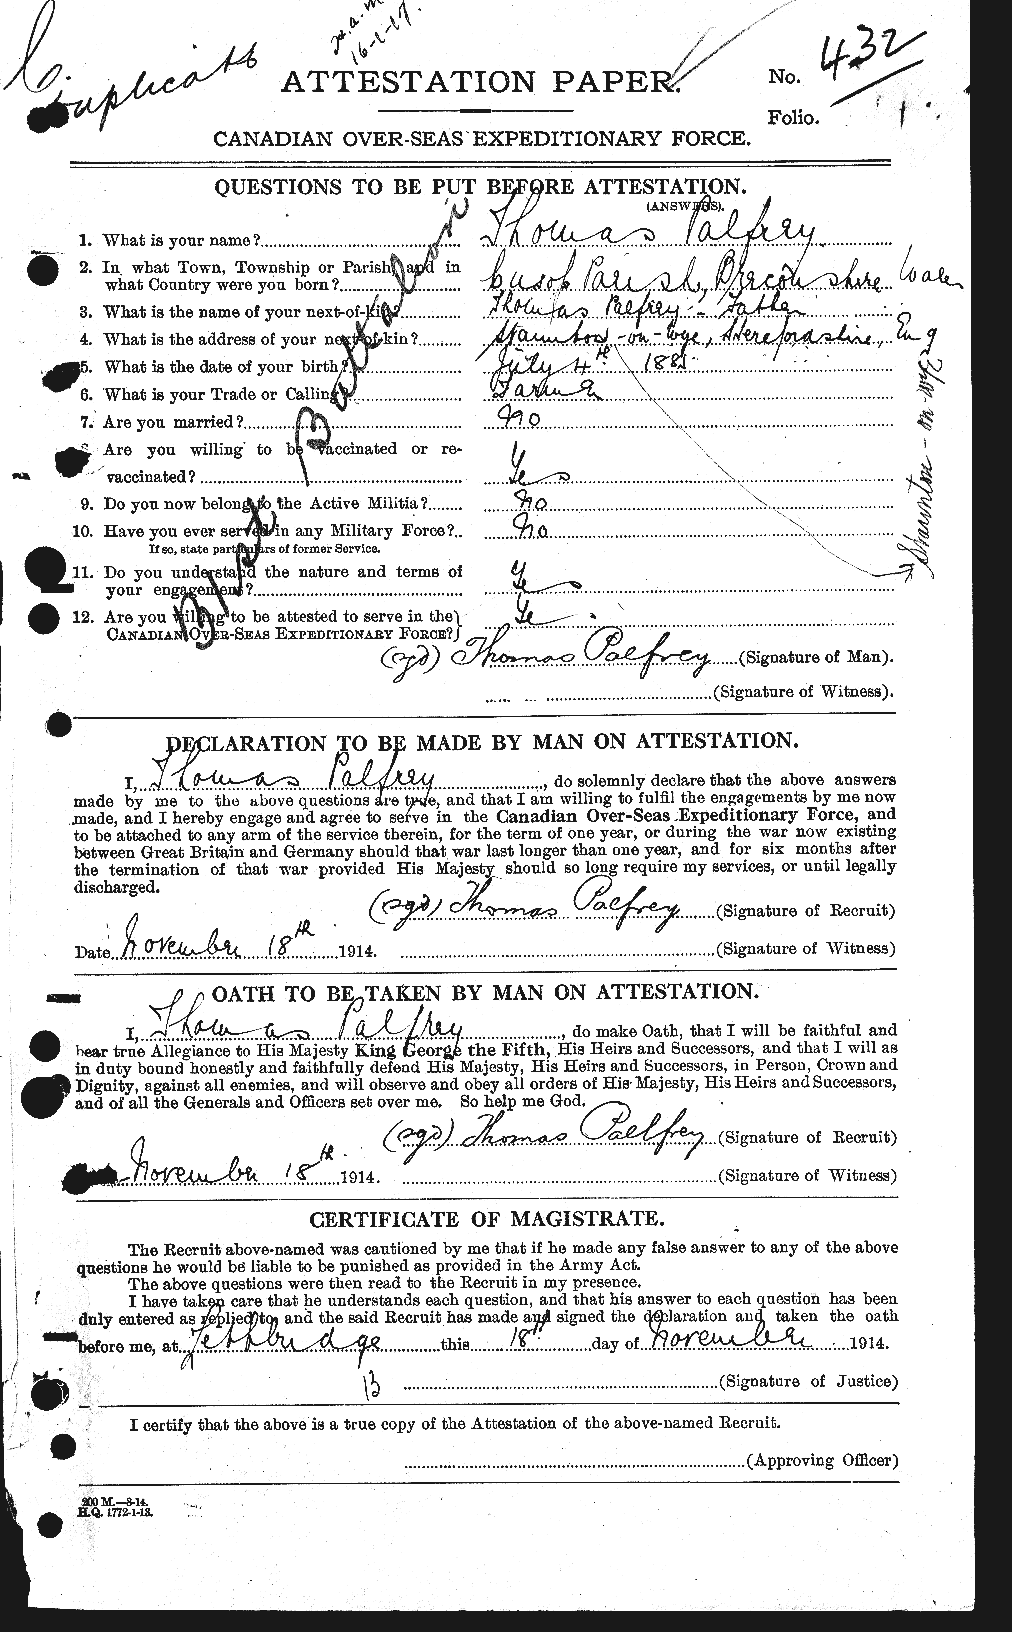 Personnel Records of the First World War - CEF 562637a